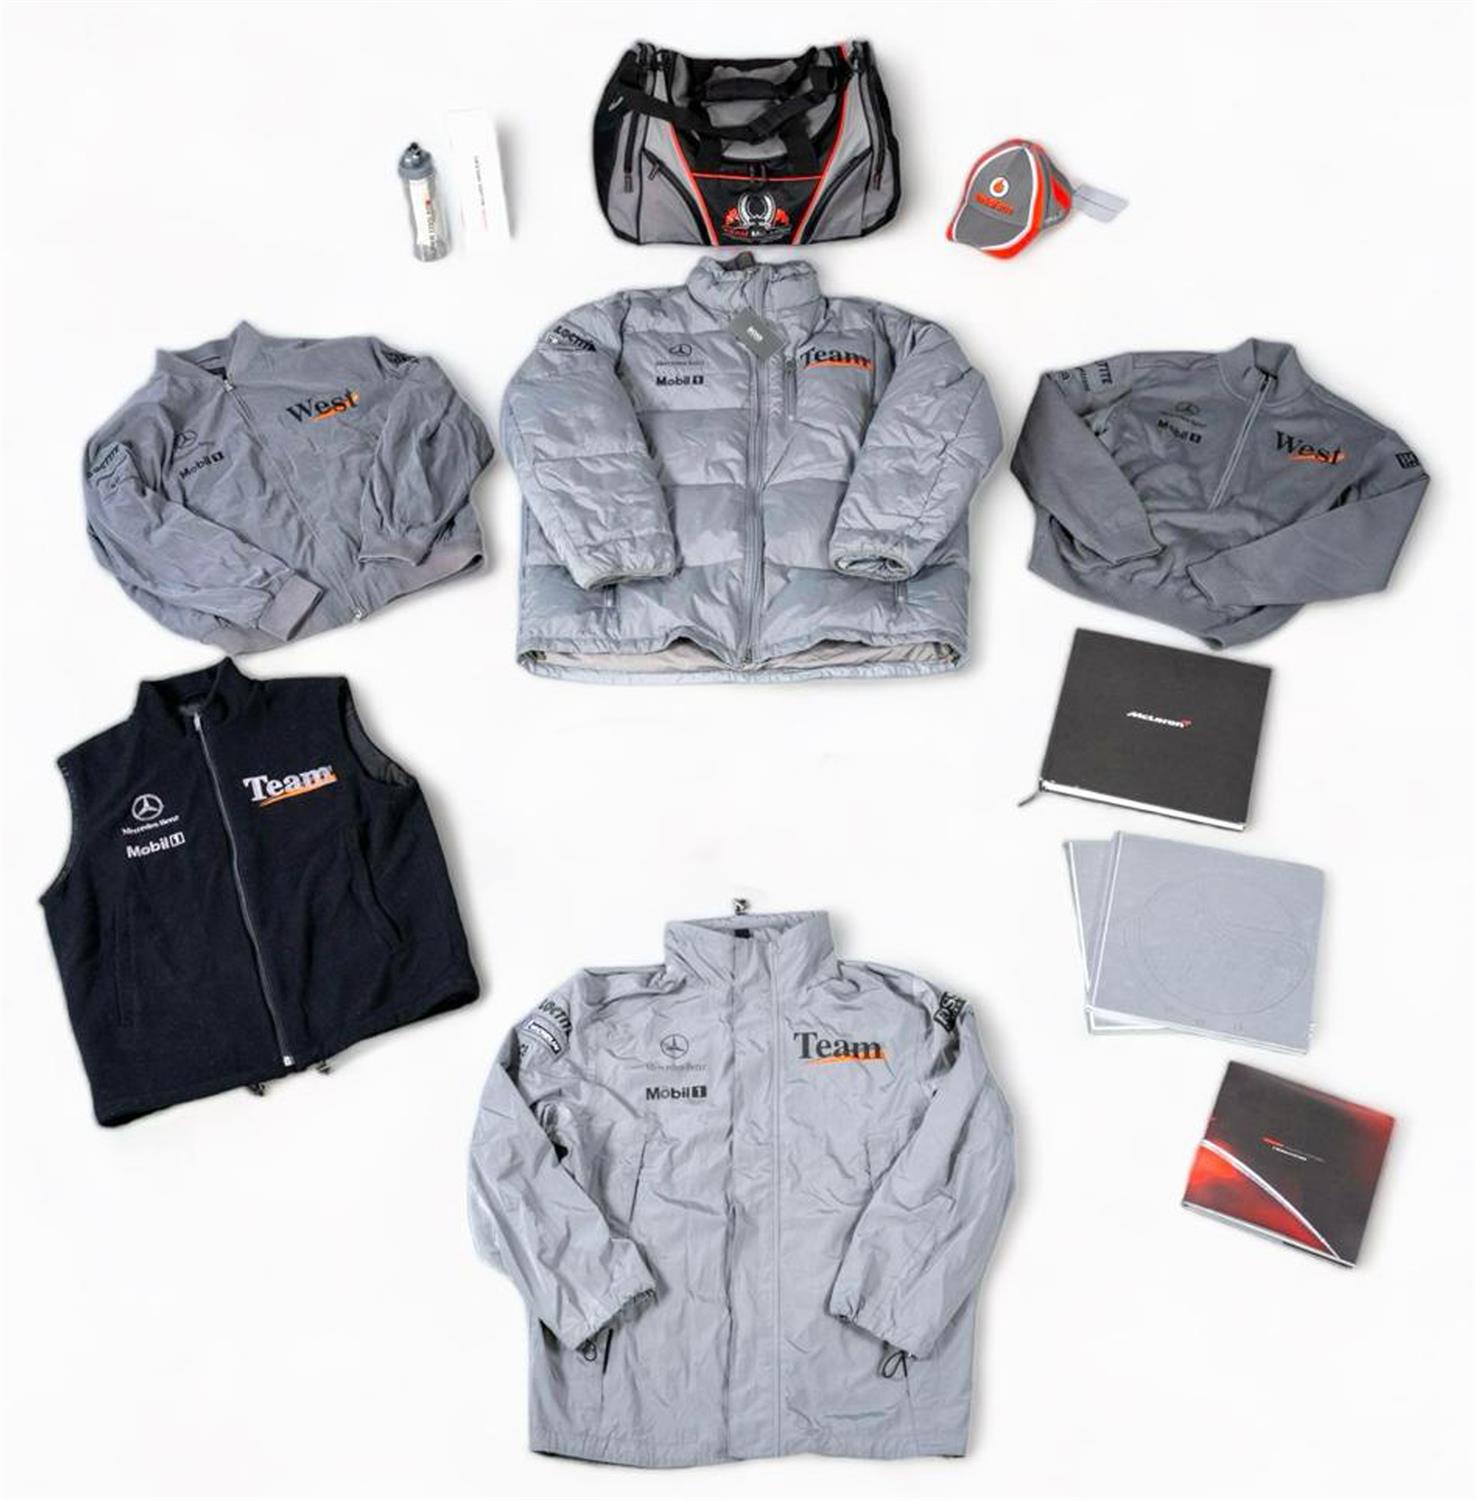 Exclusive McLaren Mercedes F1 Team Wear Clothing and other items - 5 Hugo Boss Clothing pieces